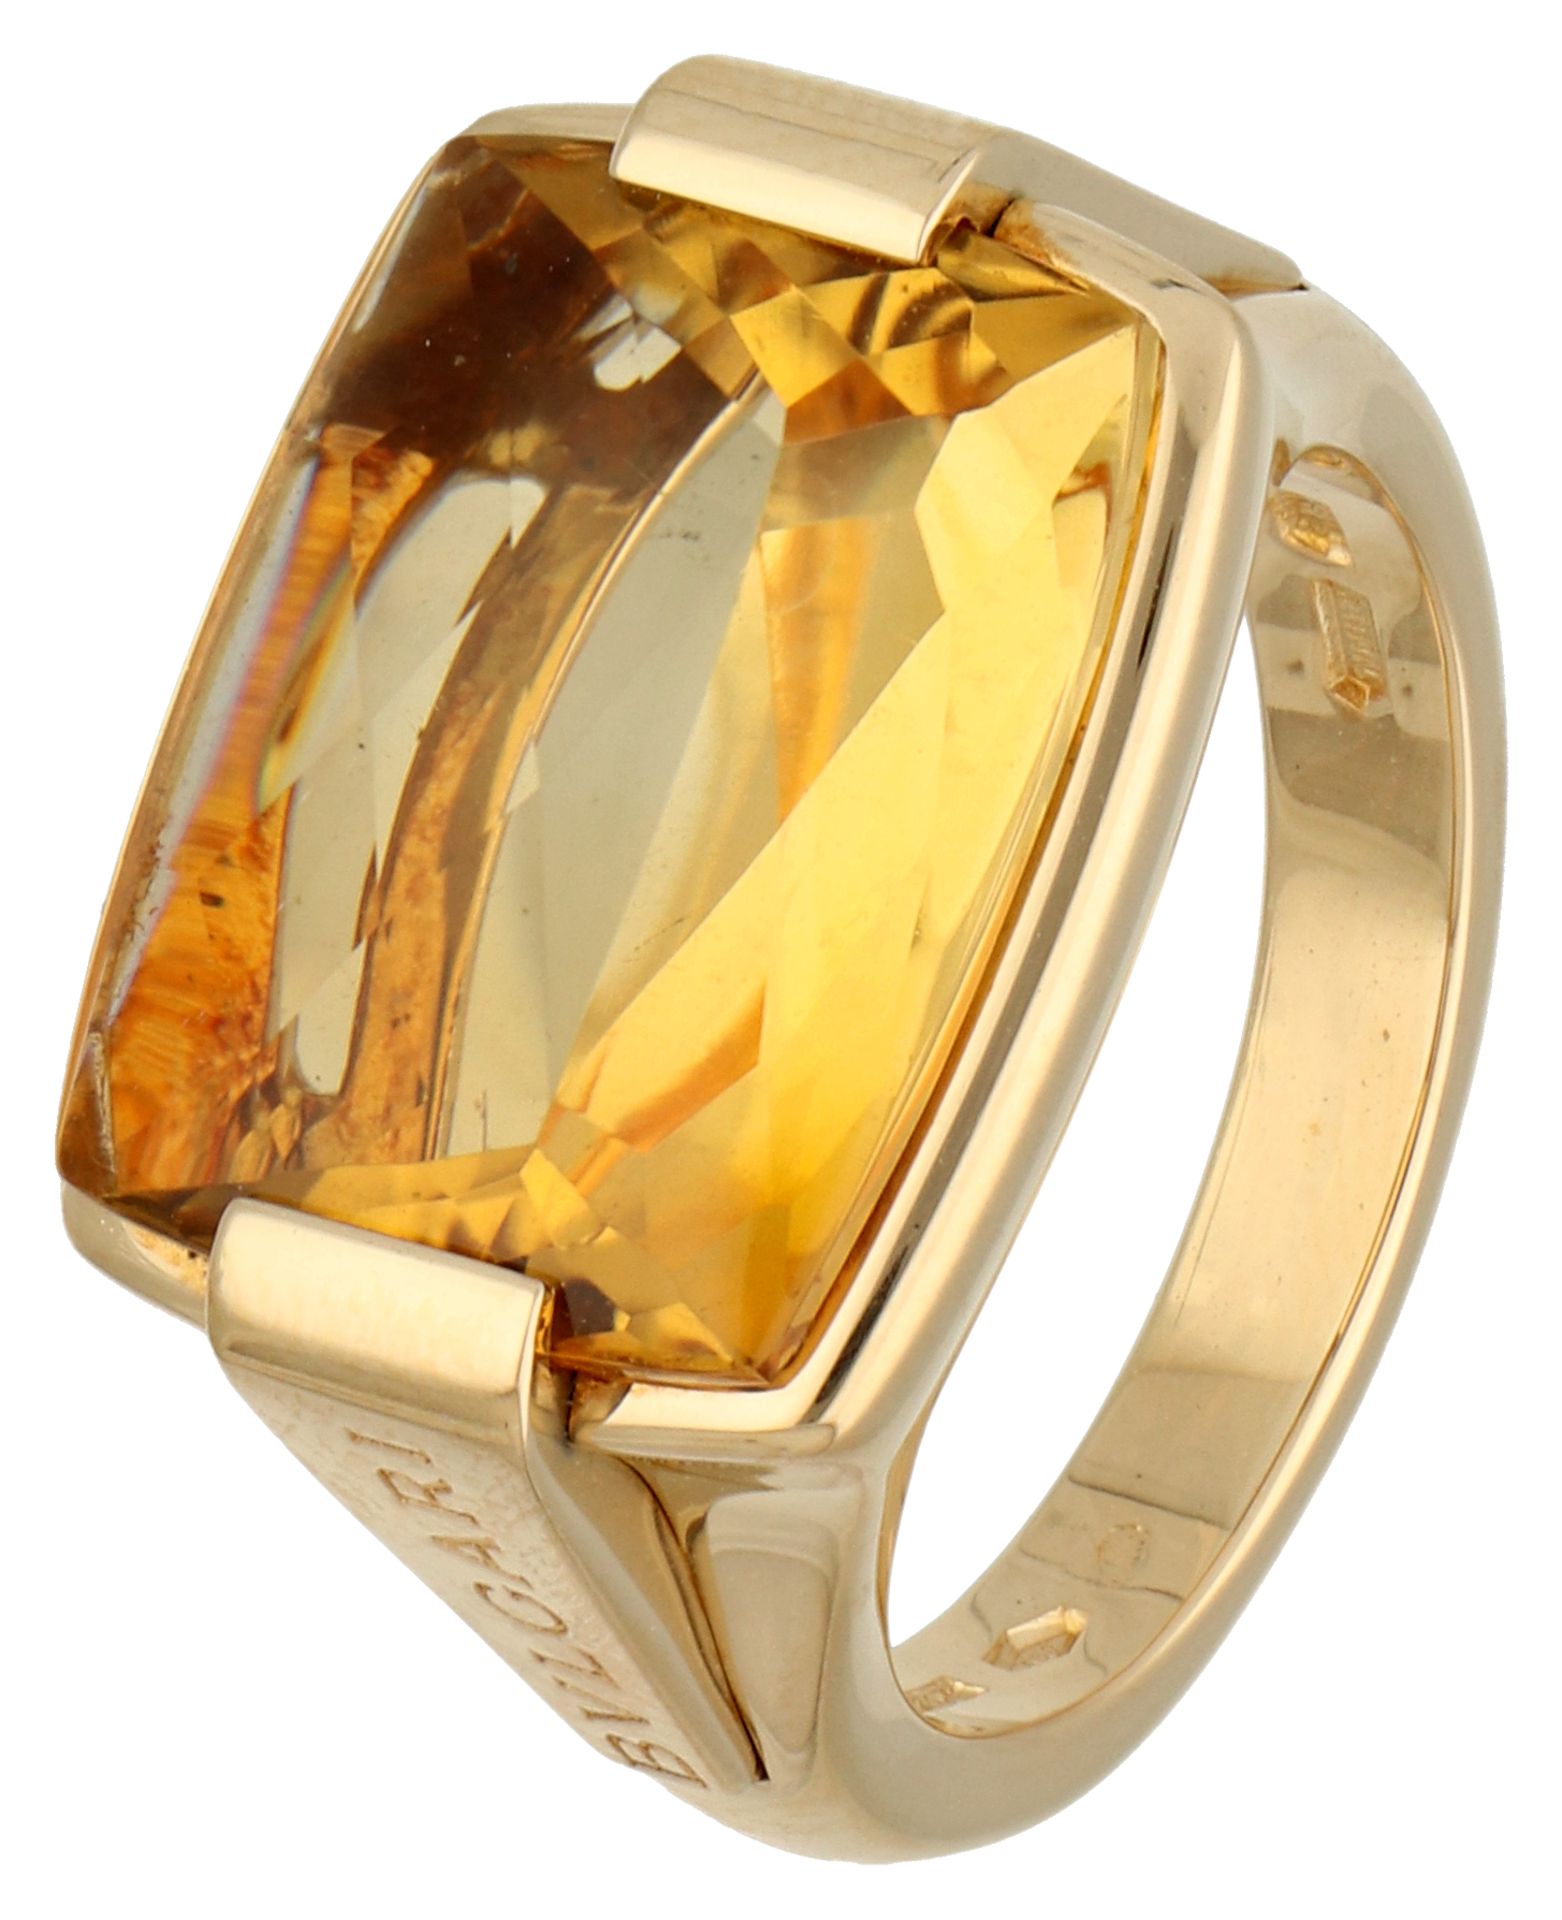 No Reserve - Bvlgari 18K yellow gold 'Allegra' ring set with approx. 9.13 ct. citrine.